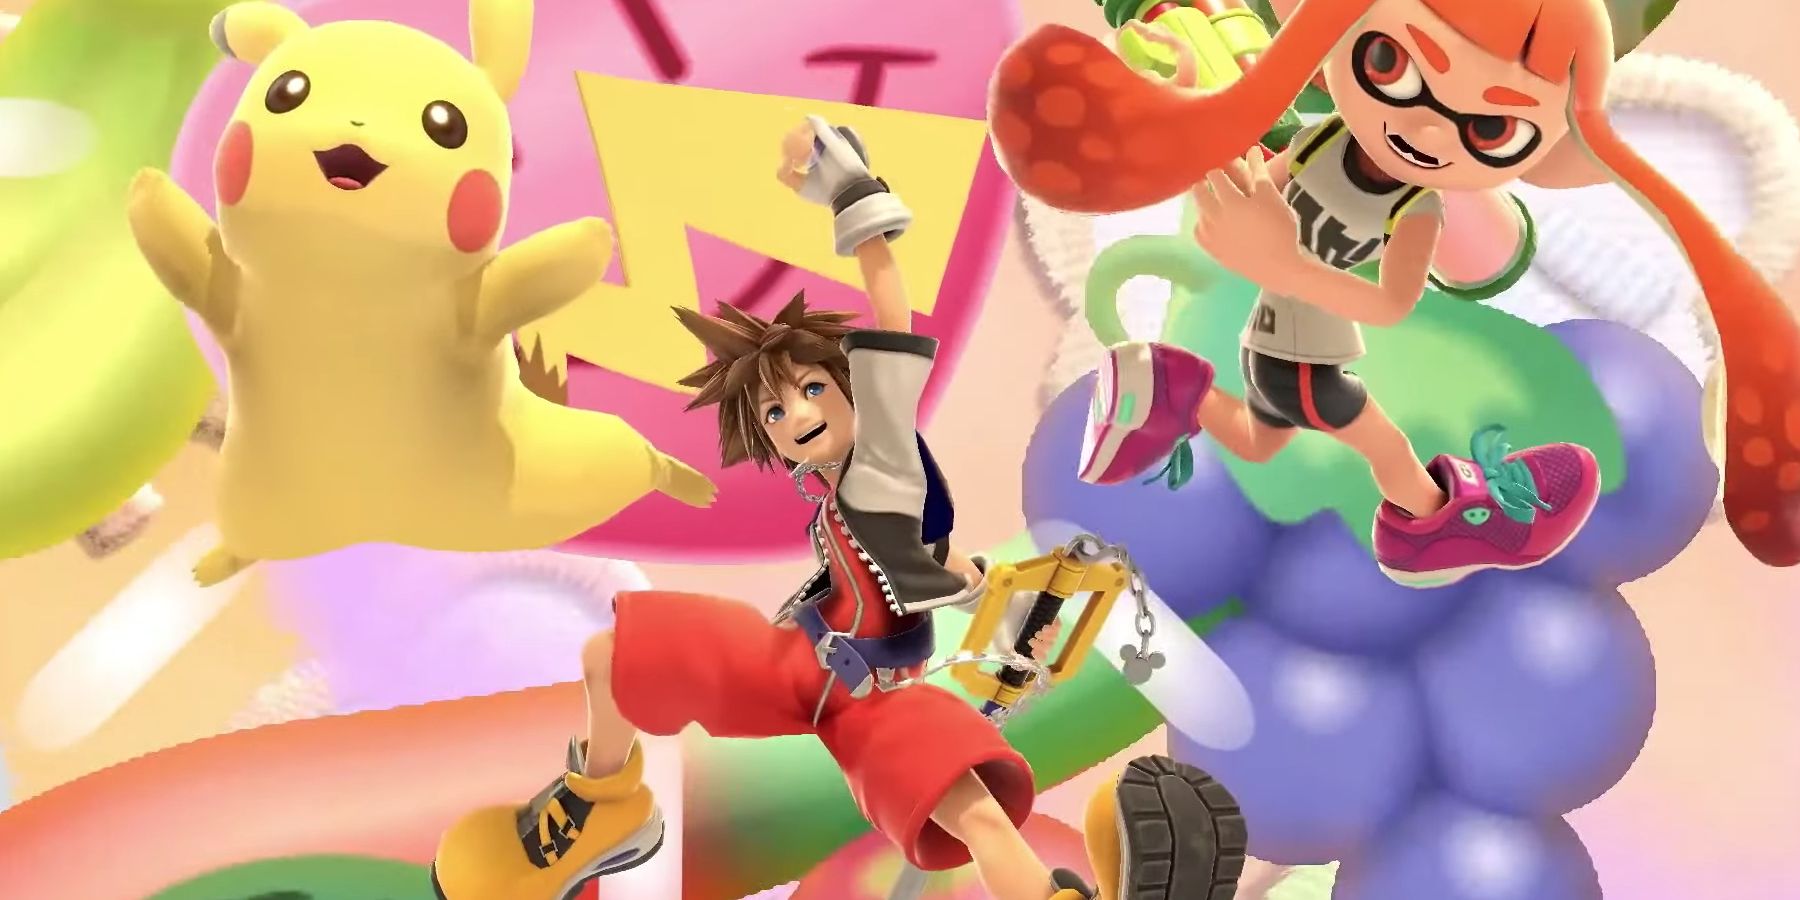 sora-with-pikachu-and-inkling